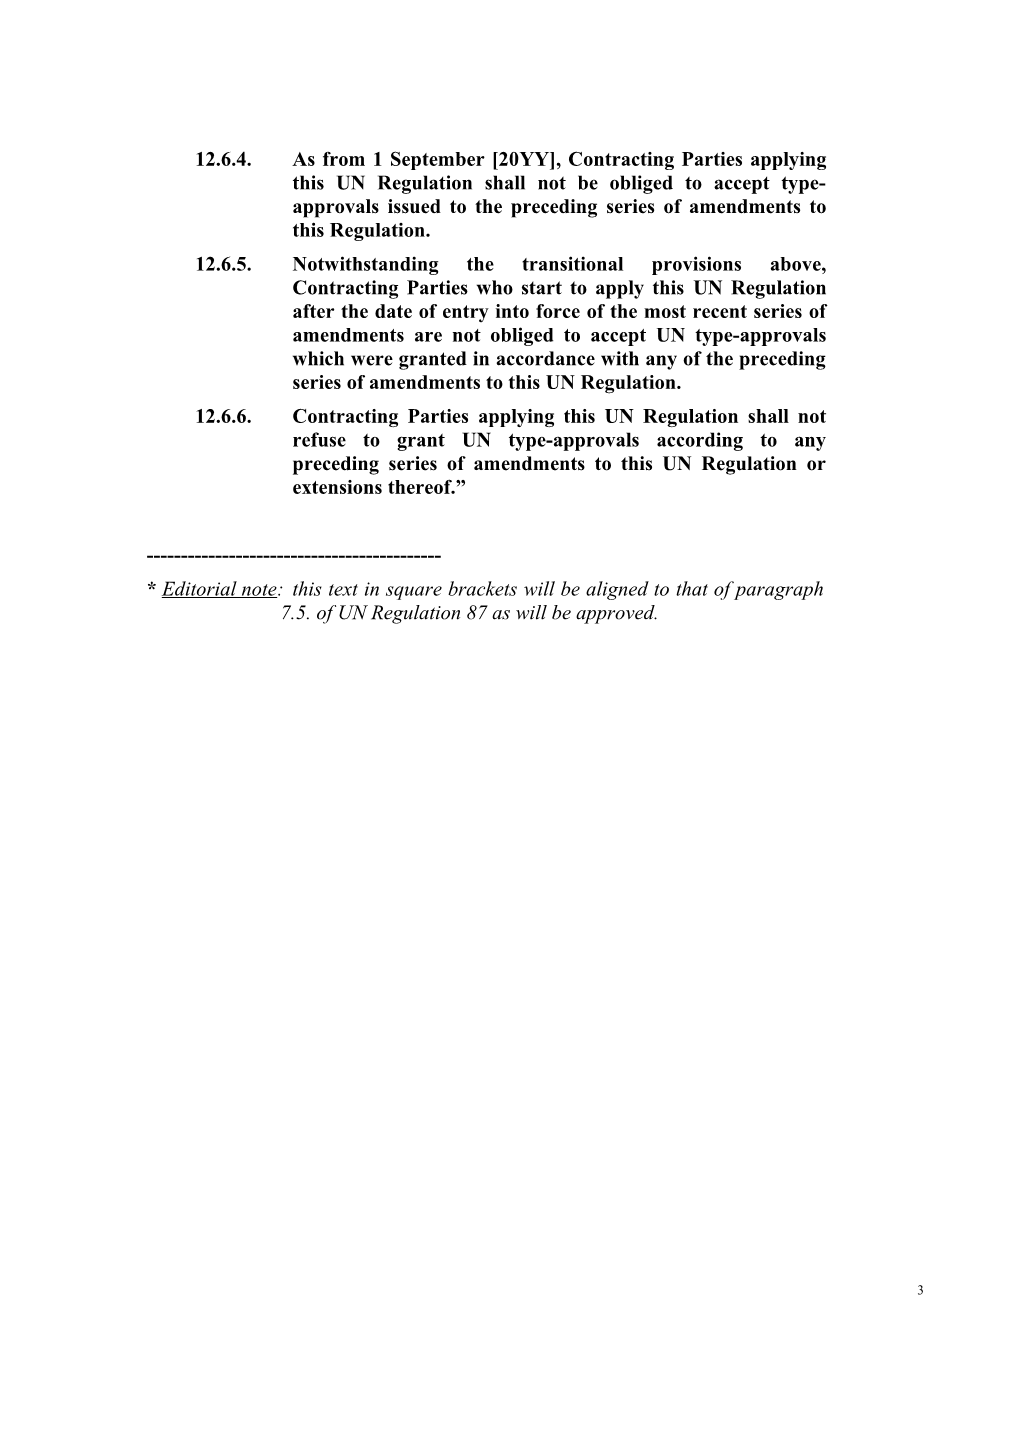 Proposal for 07 Series of Amendments to Regulation No. 48 (Installation of Lighting And